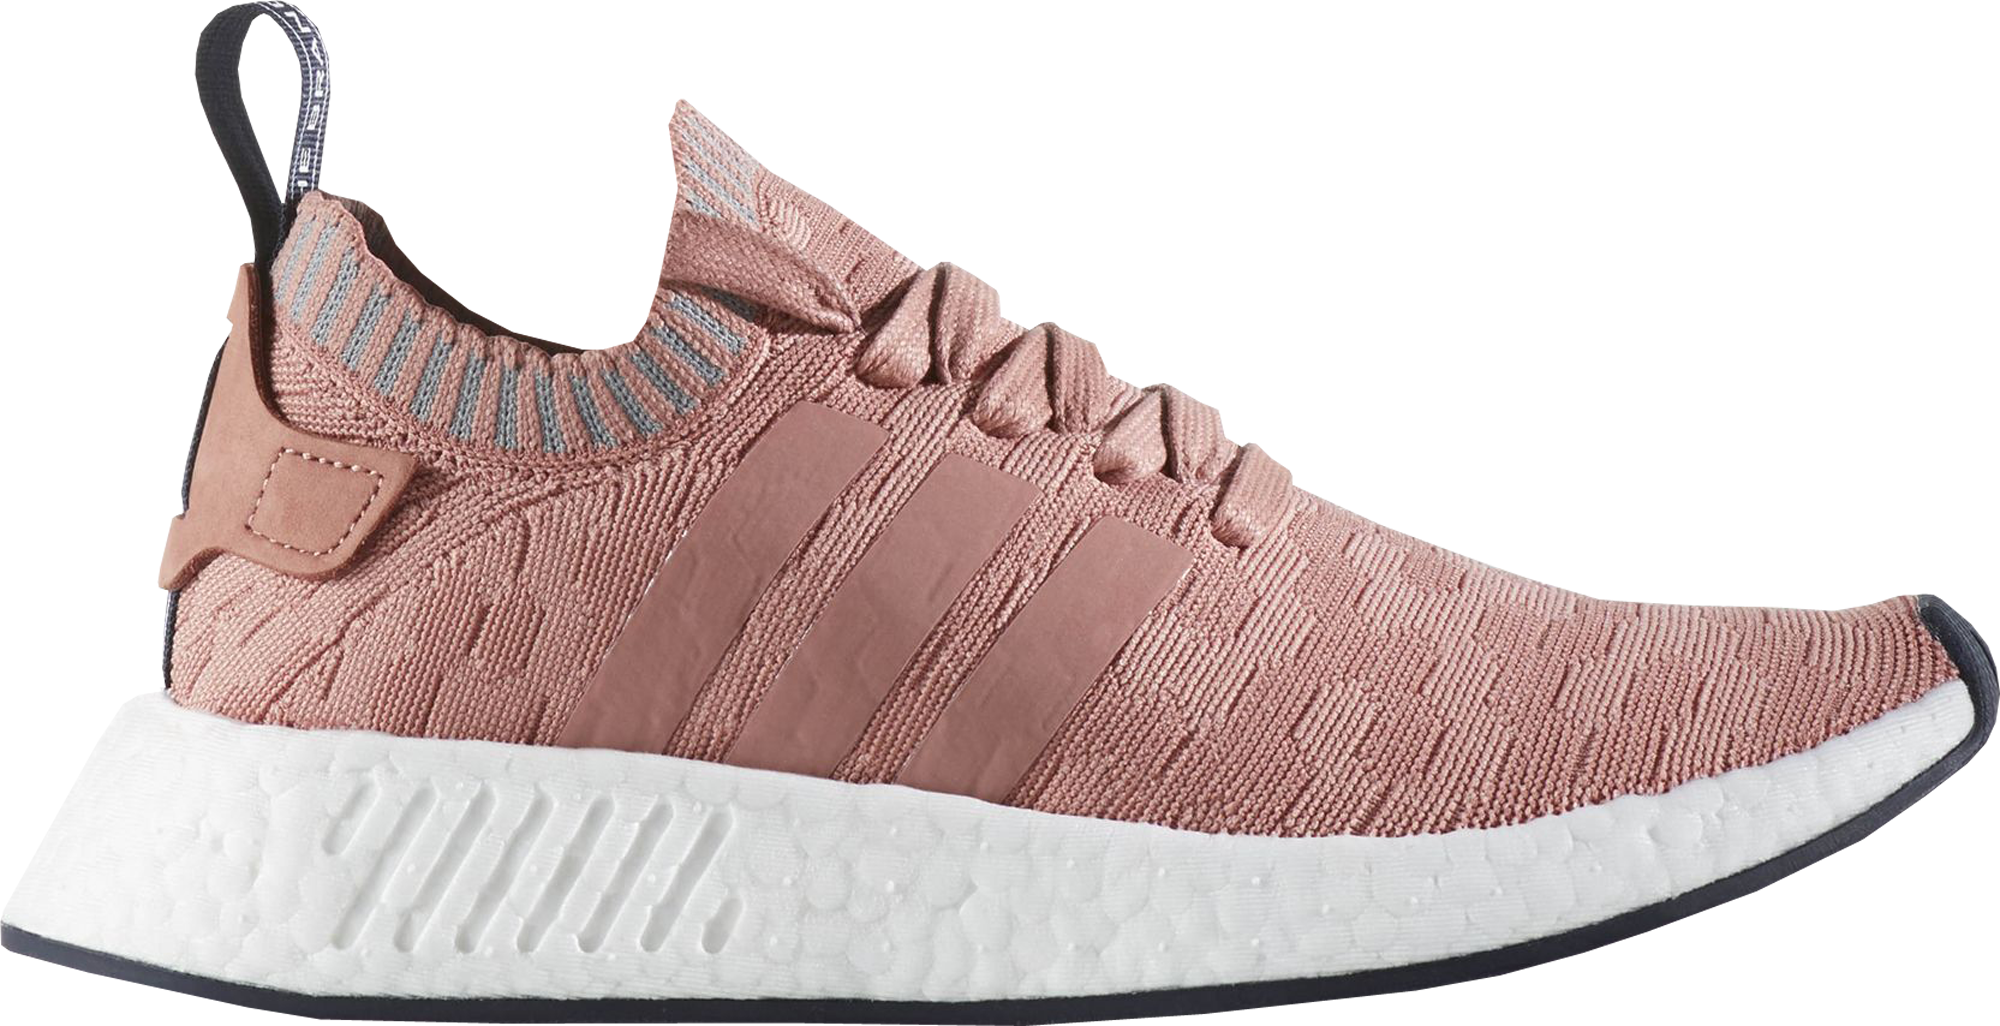 adidas nmd raw pink champs